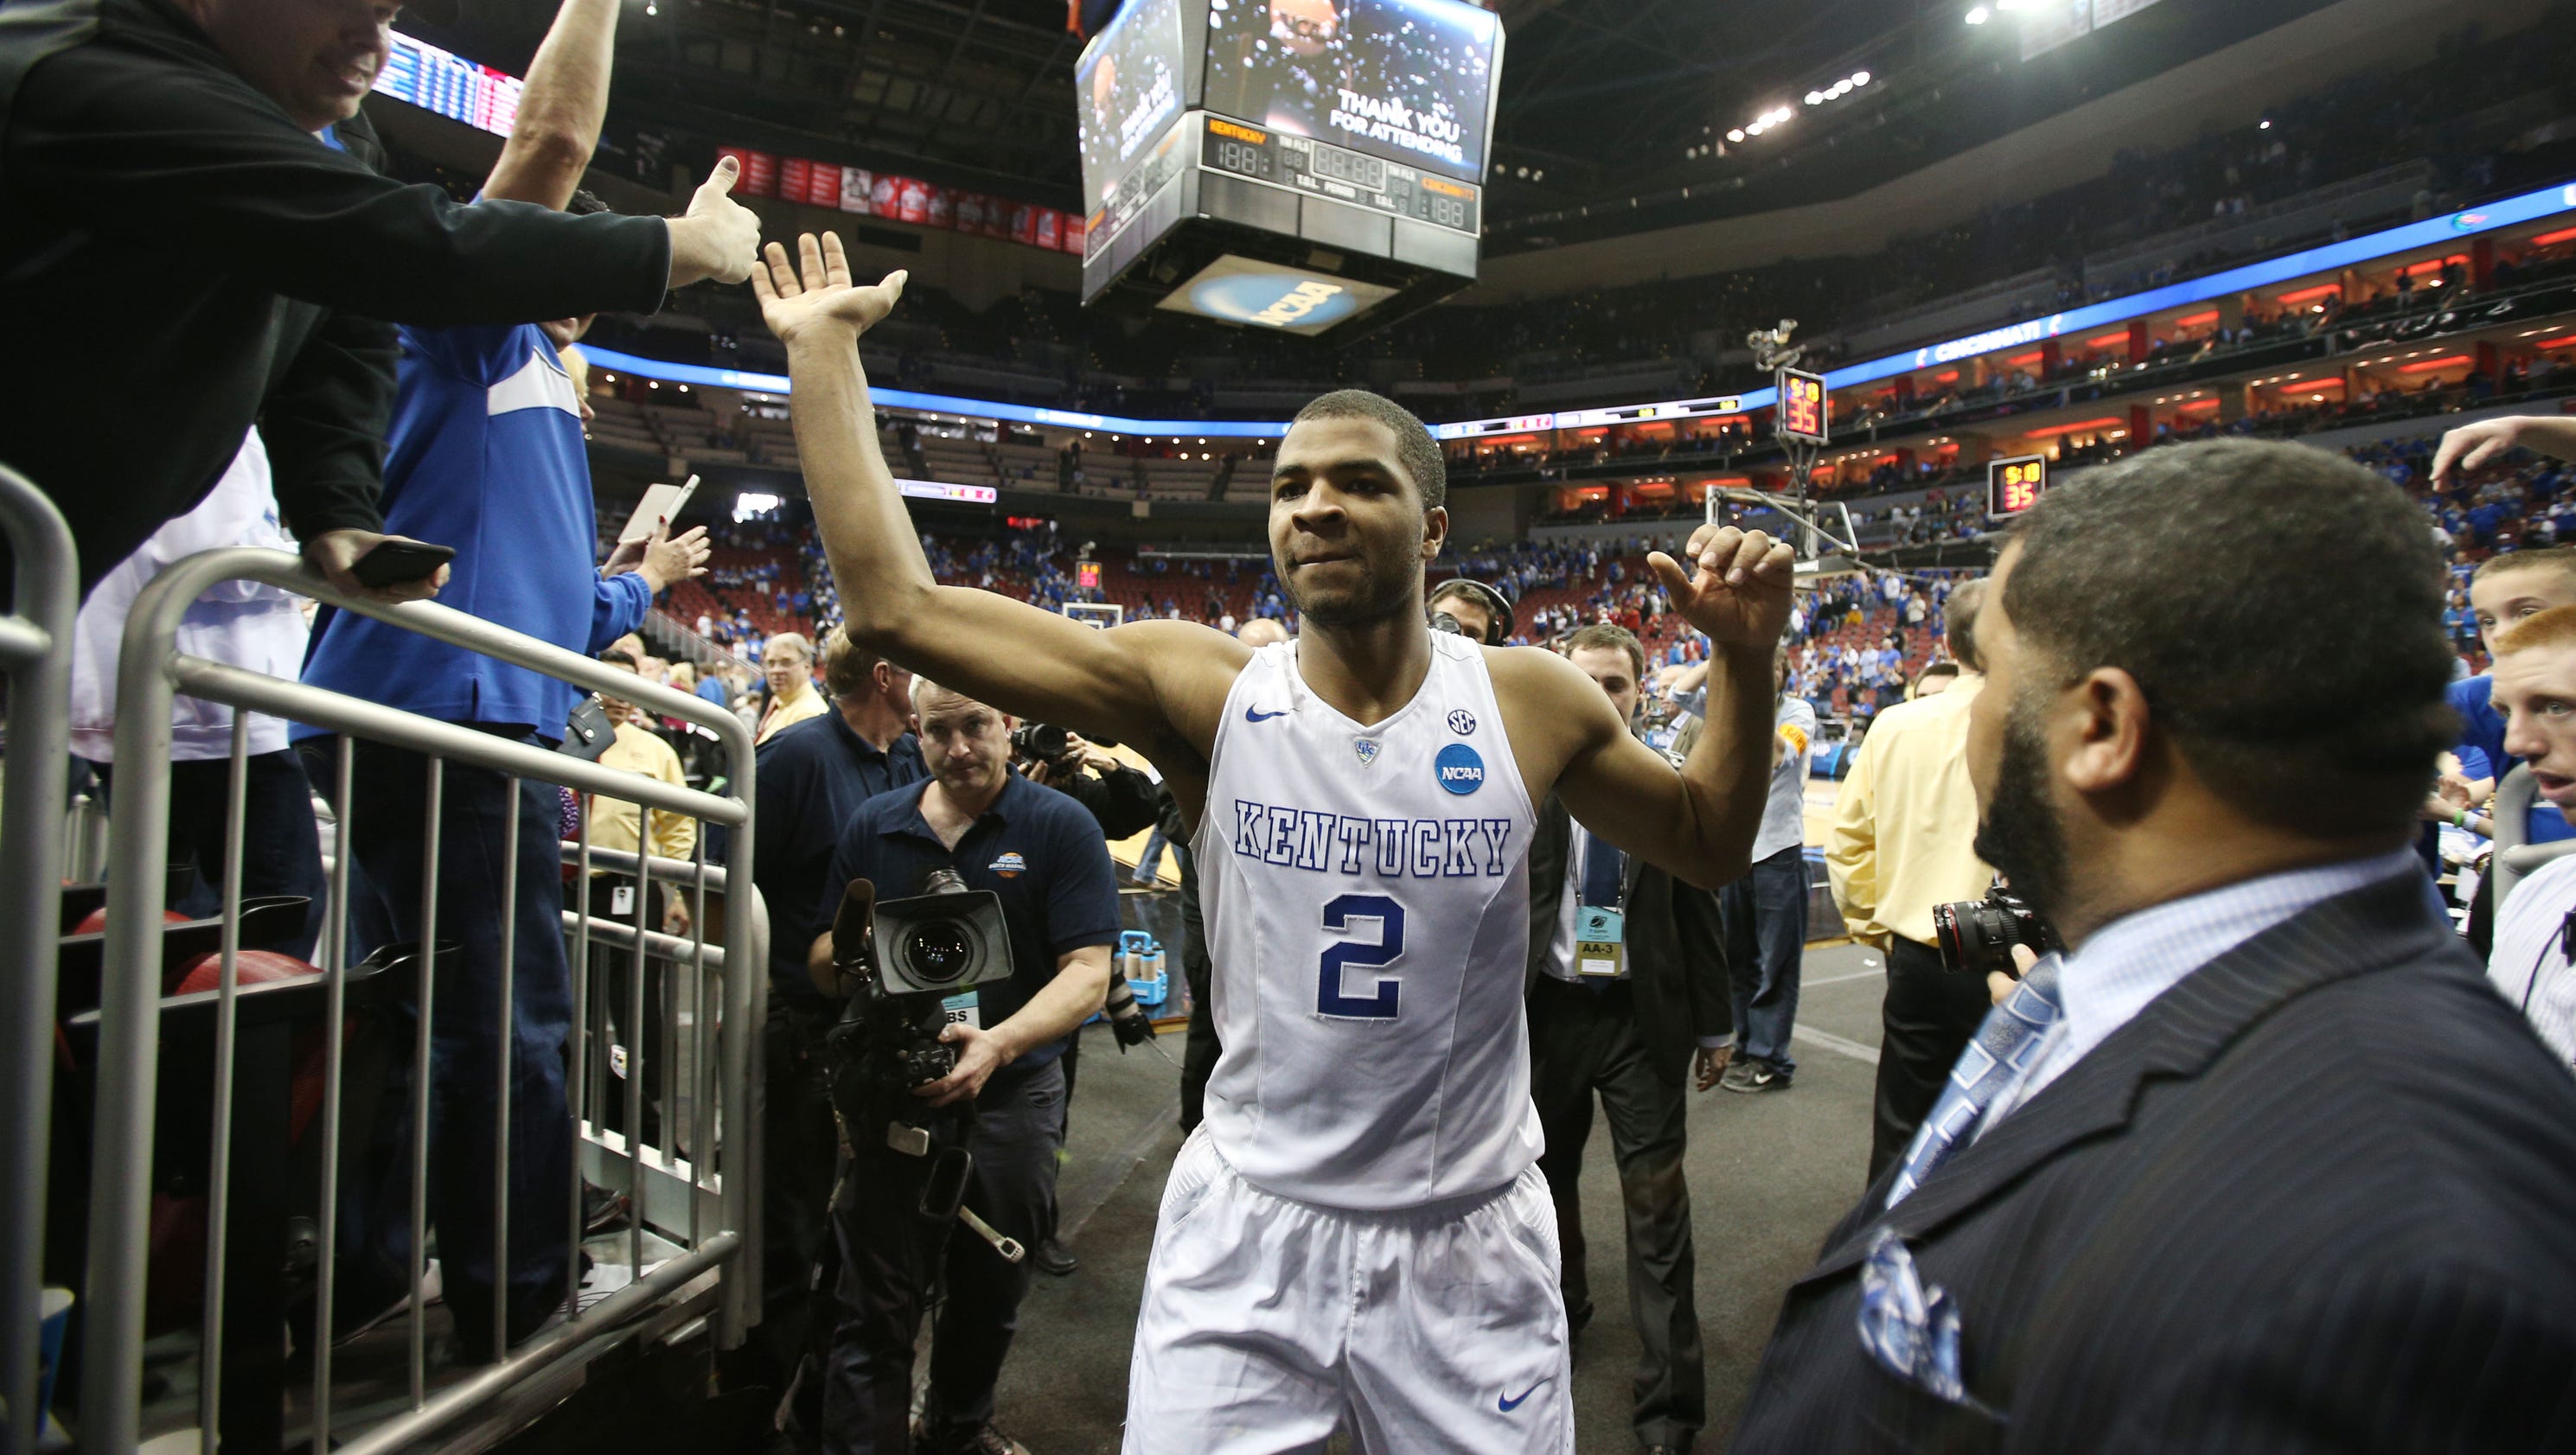 Ranking the Sweet 16 teams of the 2015 NCAA tournament